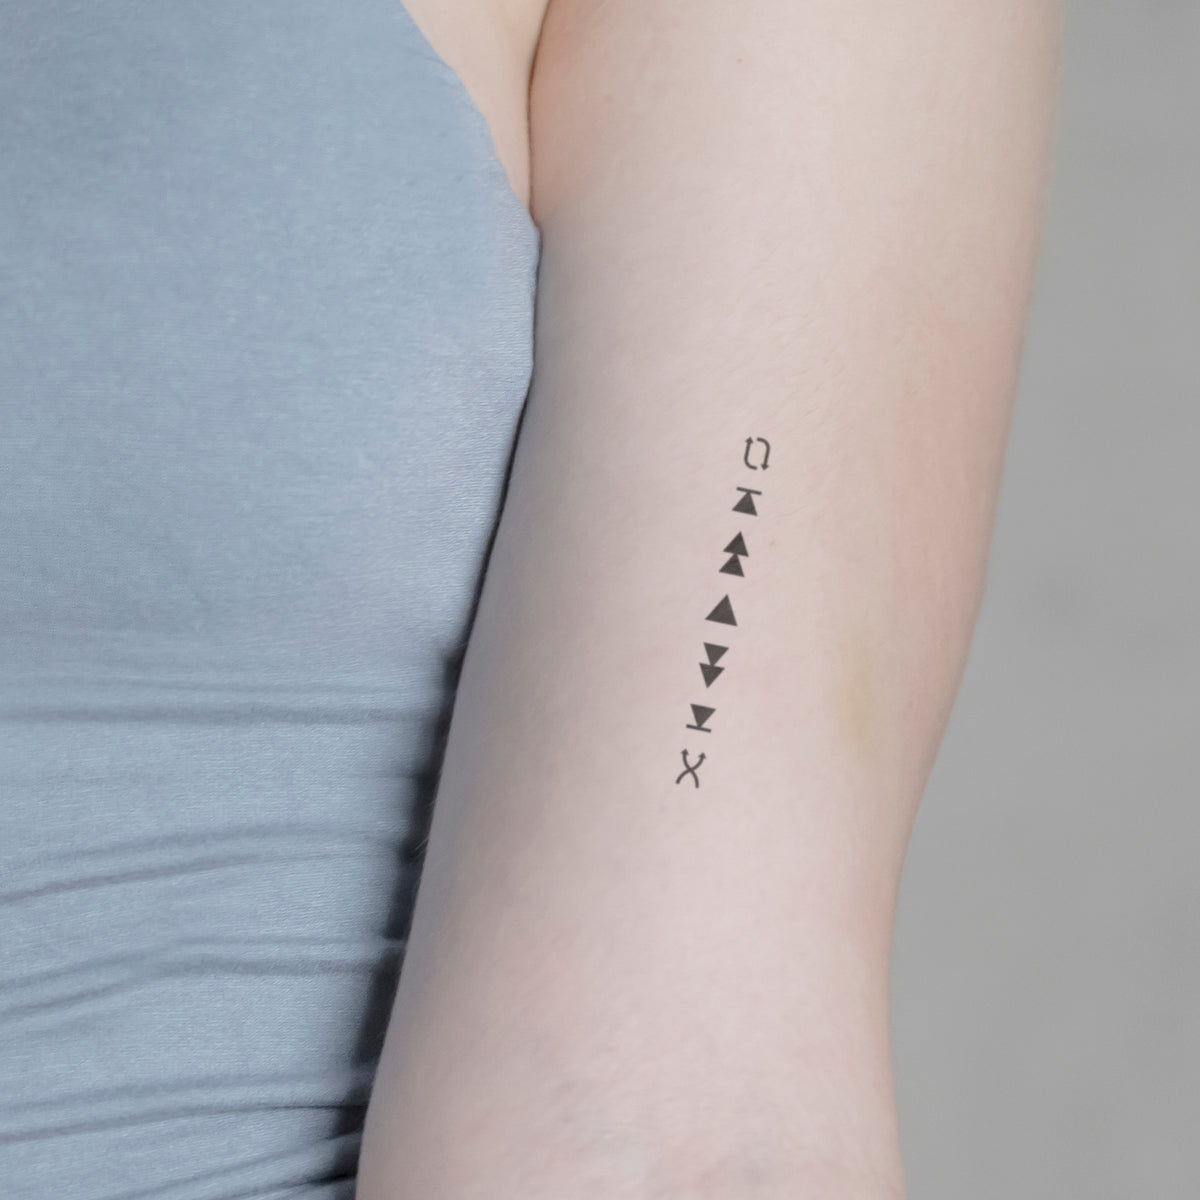 25 Tiny Tattoos That Are So Classy Even Your Mom Will Love Them. –  lifebuzz.com